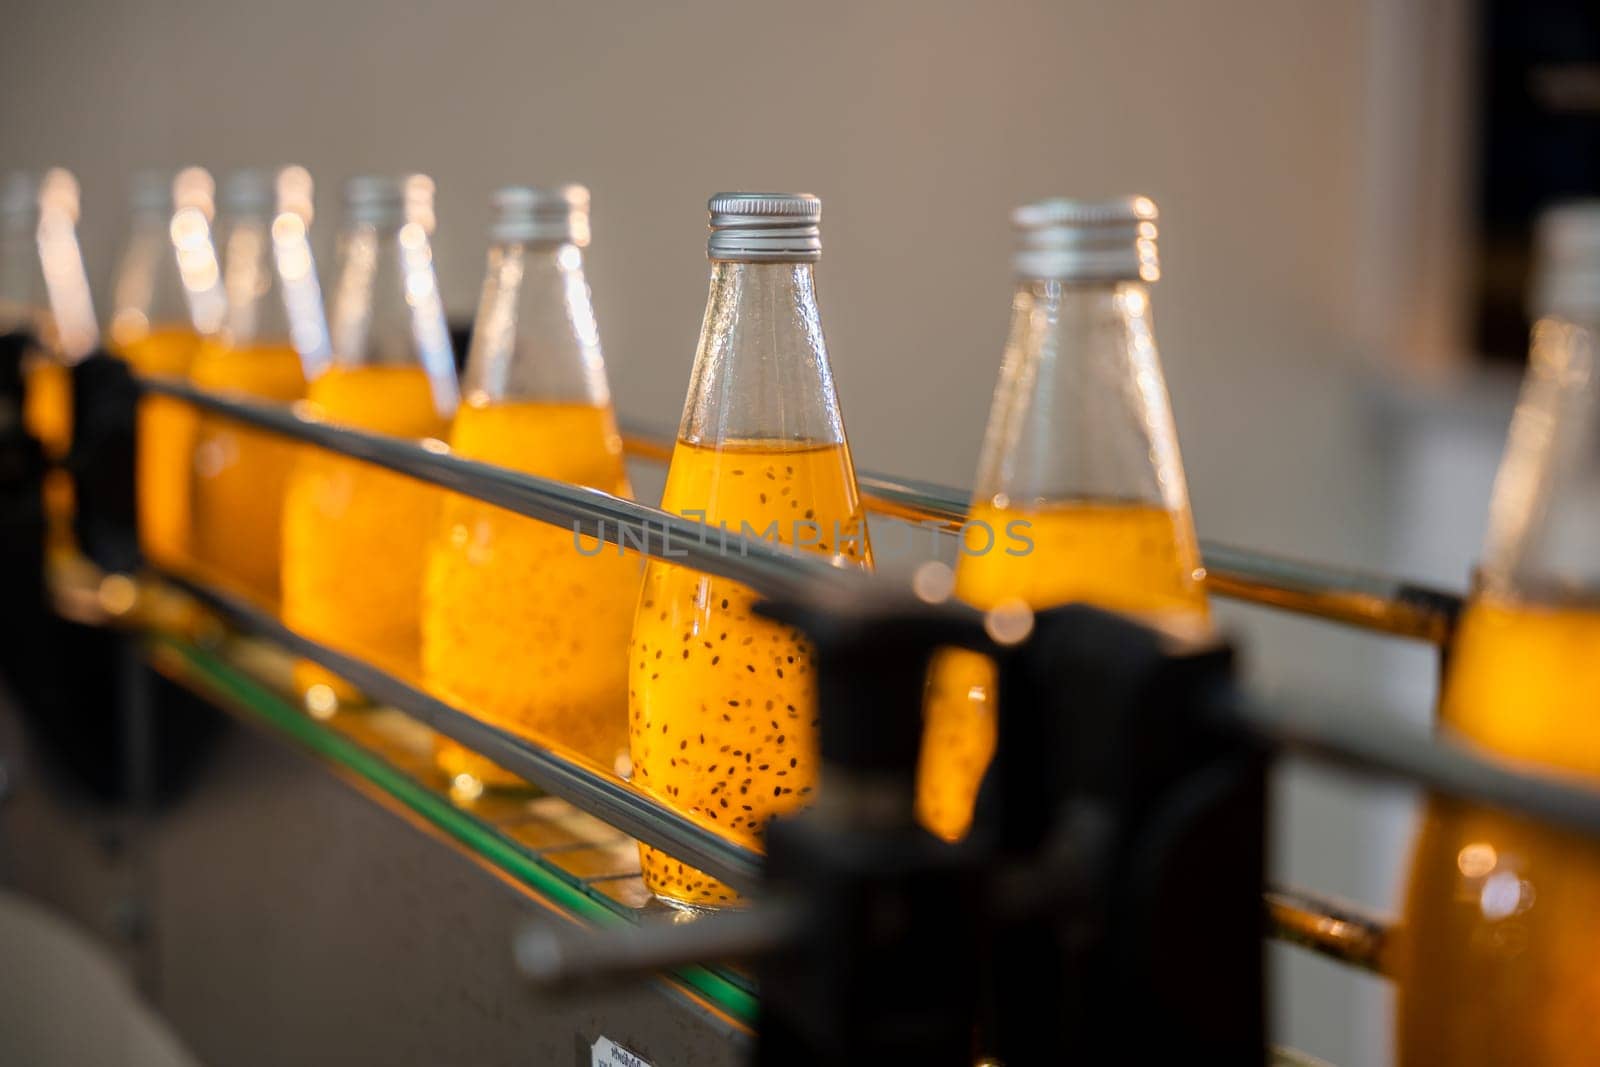 Basil or chia seed beverages with pomegranate undergo quality filling into transparent bottles by Sorapop